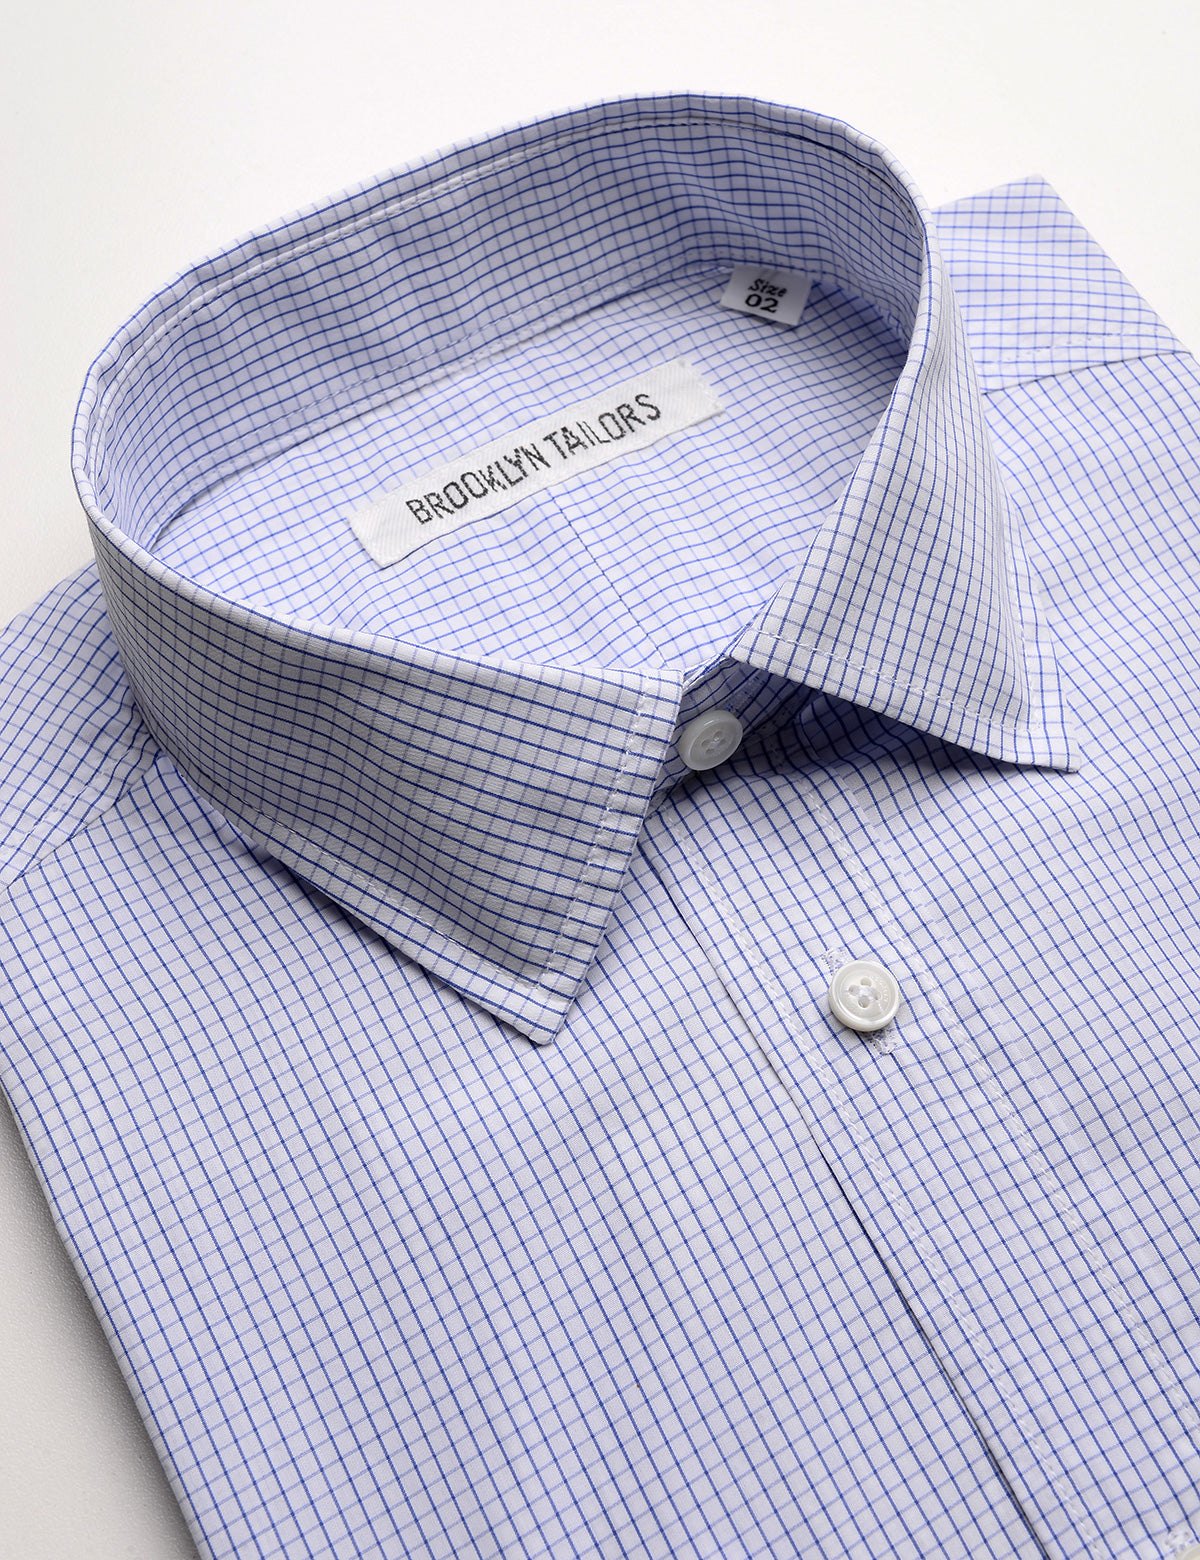 Detail shot of collar, fabric pattern, and buttons on Brooklyn Tailors BKT20 Slim Dress Shirt in Graph Check - White & Blue